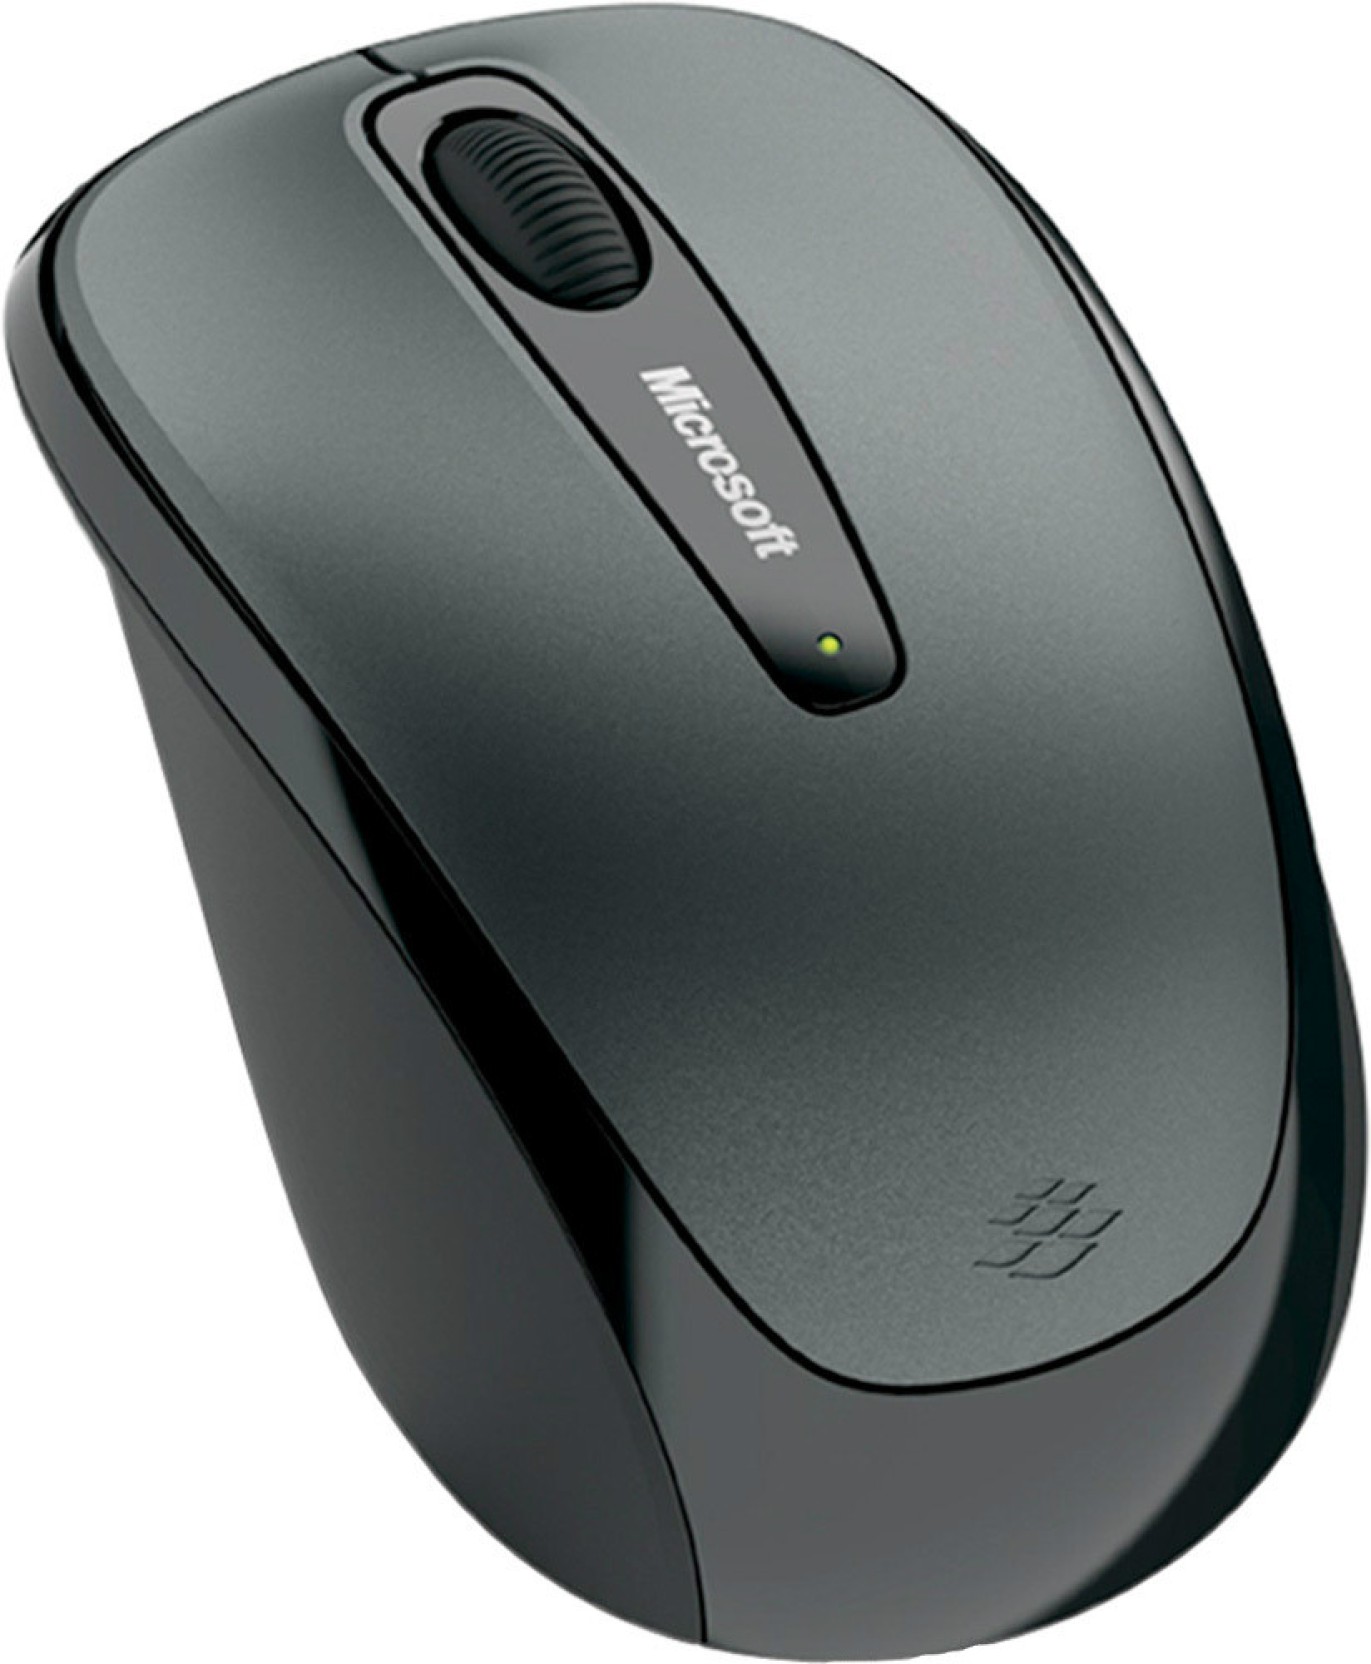 microsoft wireless mouse 3500 disassembly